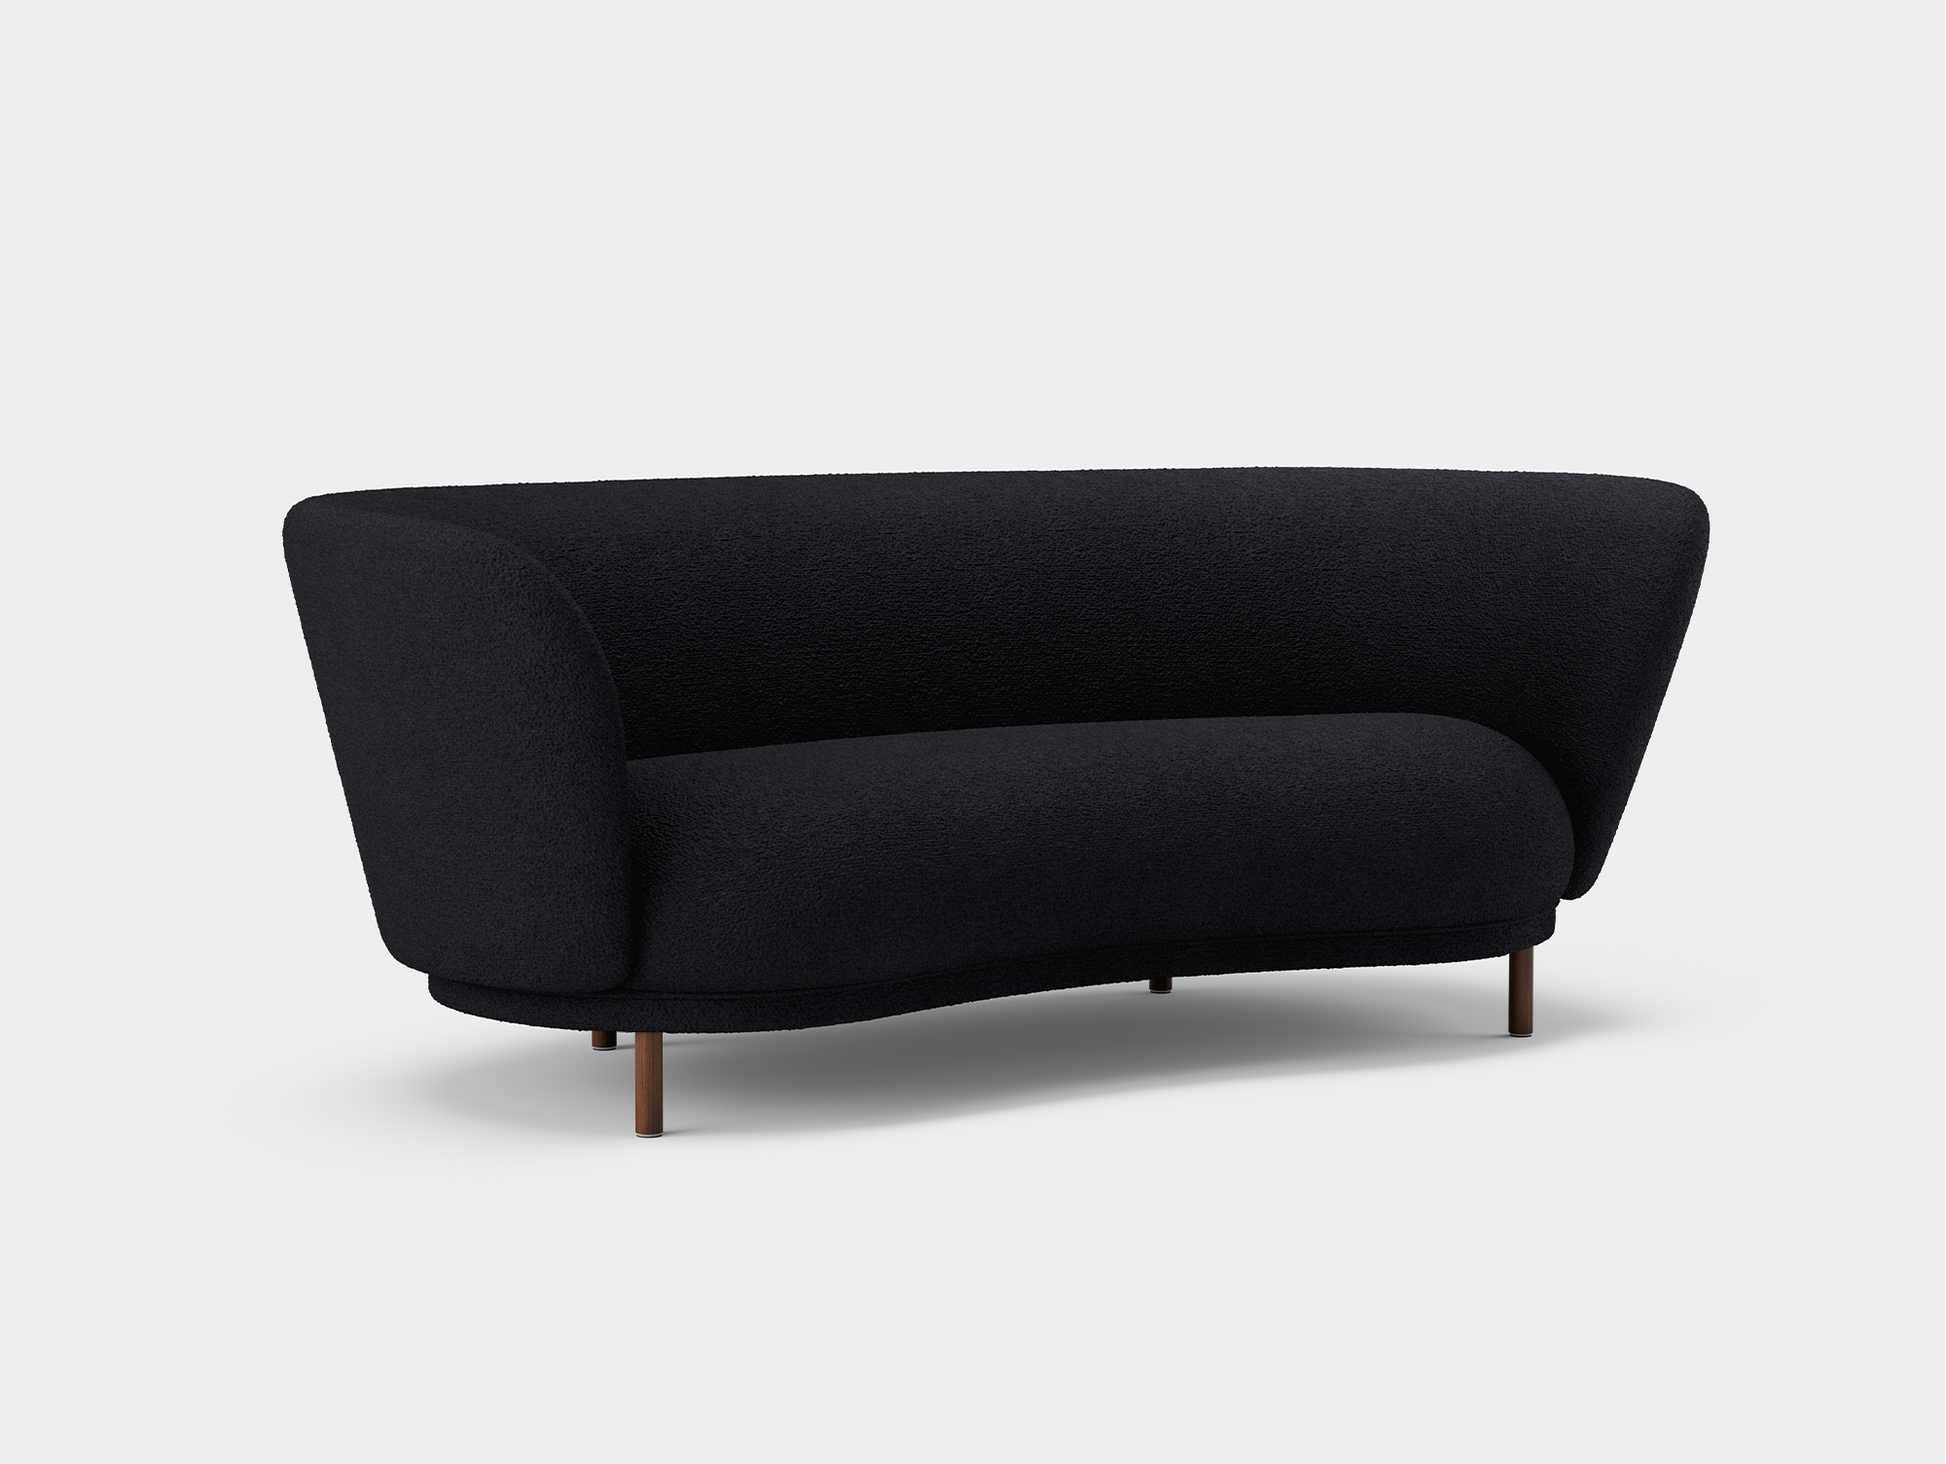 Dandy 2-Seater Sofa by Massproductions - Storr Coal 0157 / Walnut Stained Beech Legs